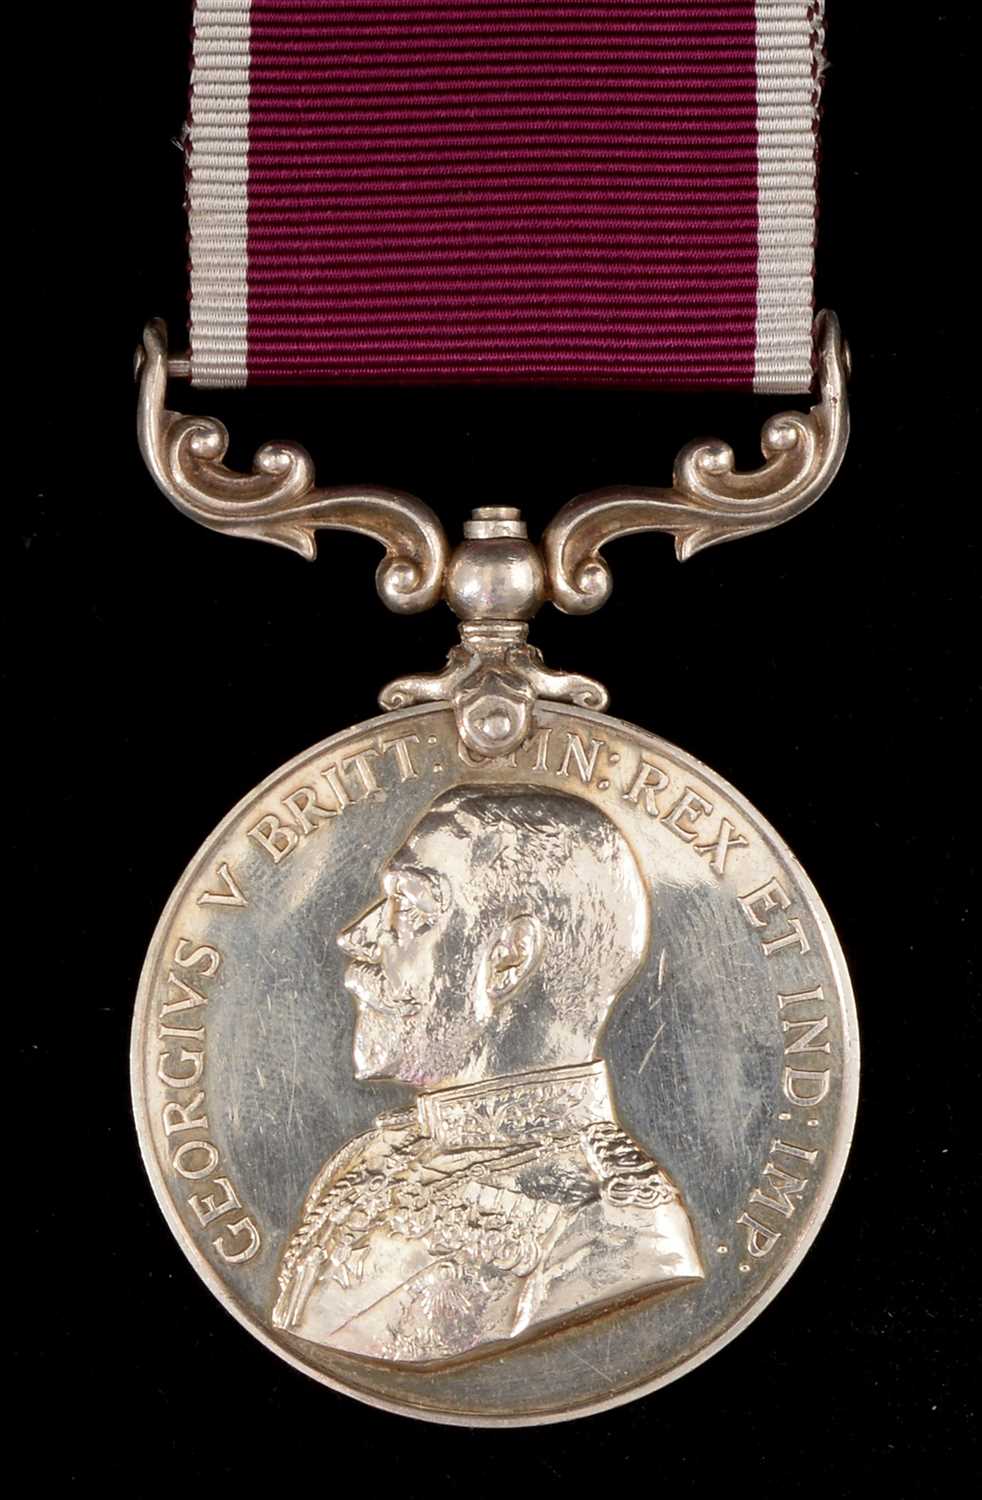 Lot 1780 - Army Long Service and Good Conduct medal